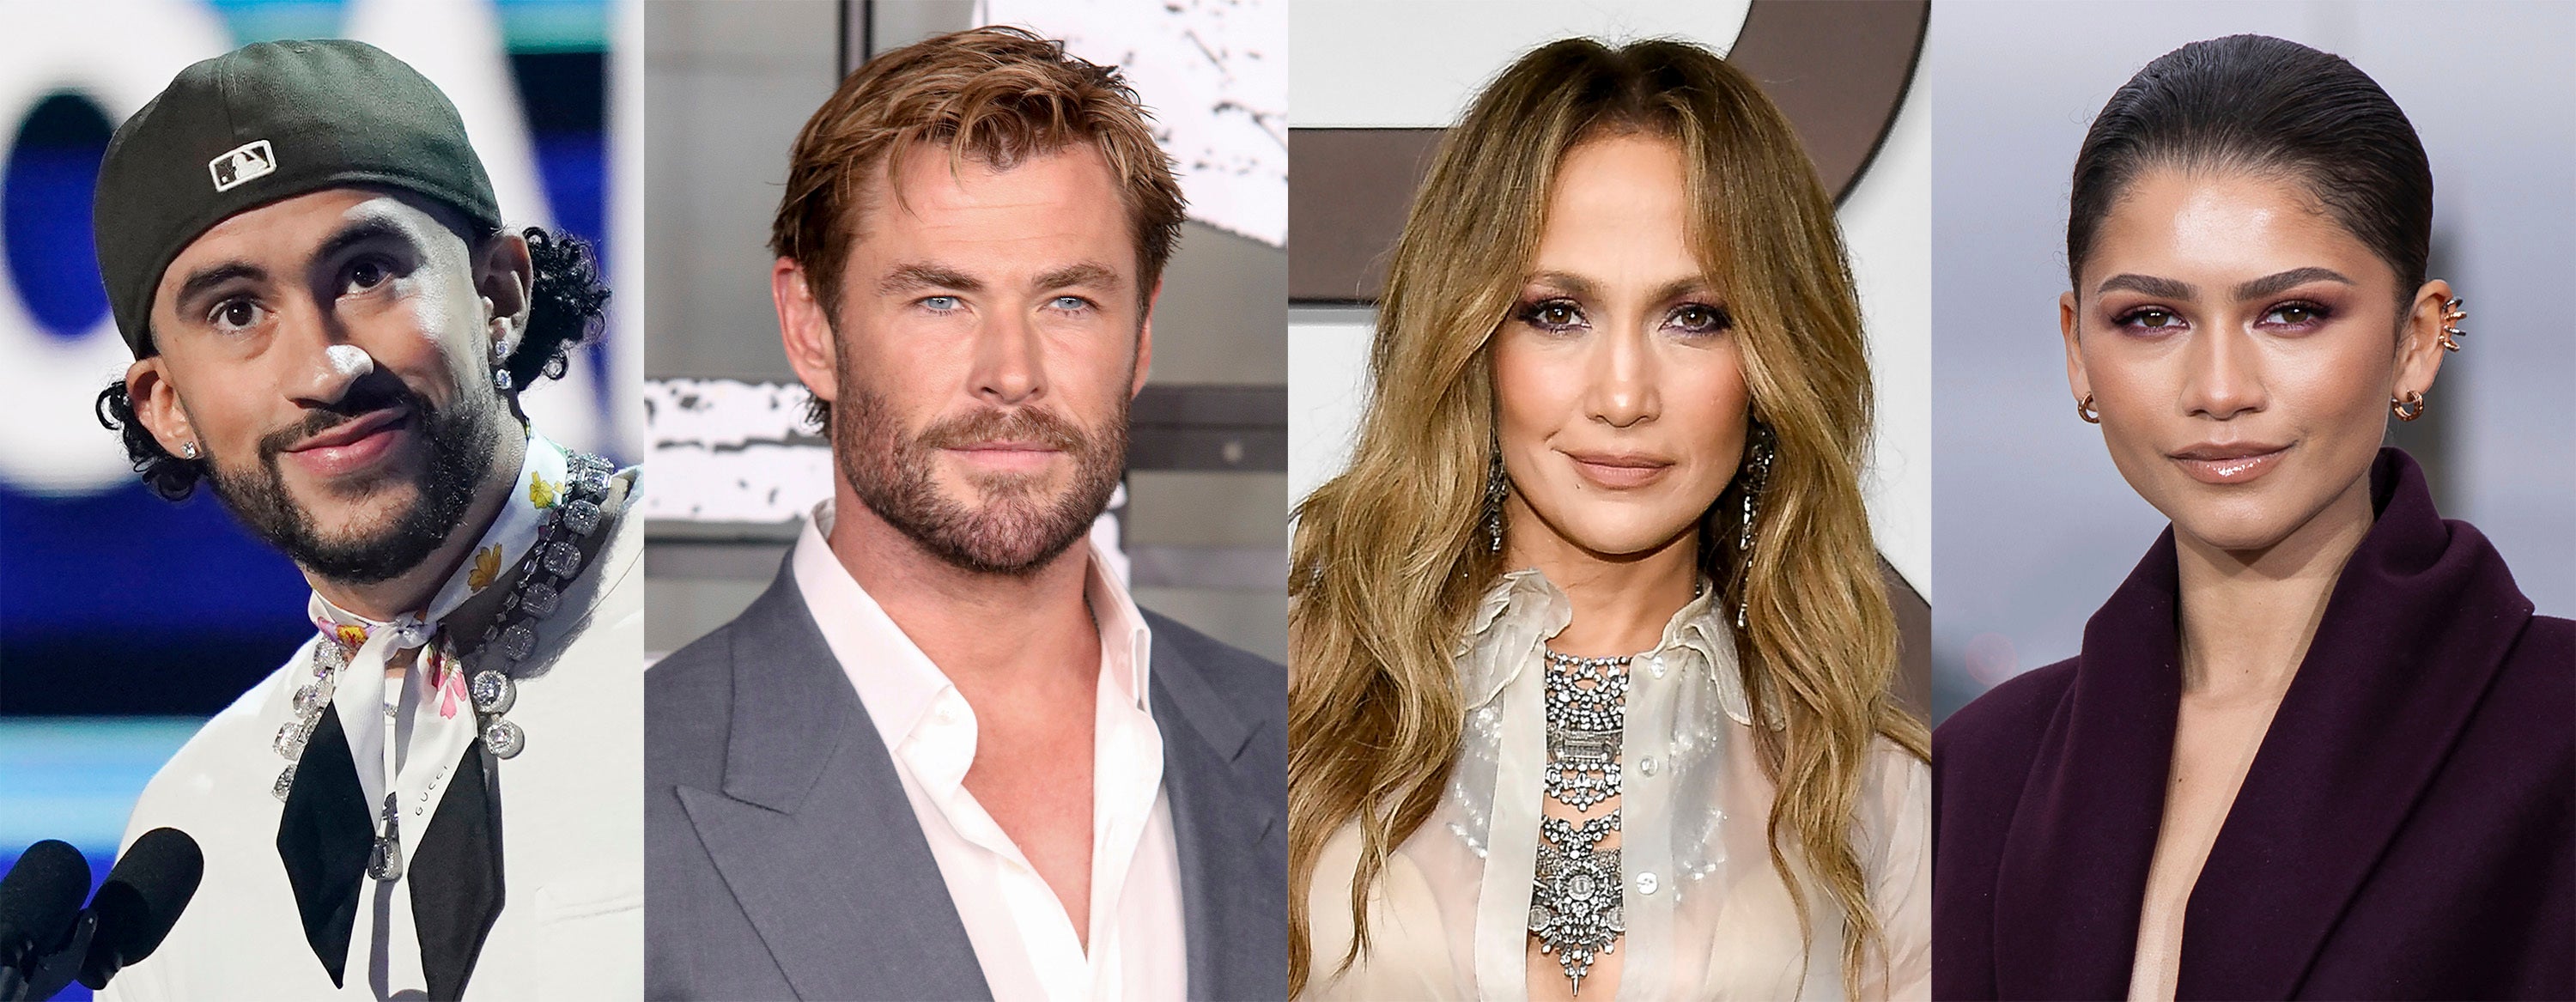 The co-chairs of this year’s Met Gala: Bad Bunny, Chris Hemsworth, Jennifer Lopez and Zendaya